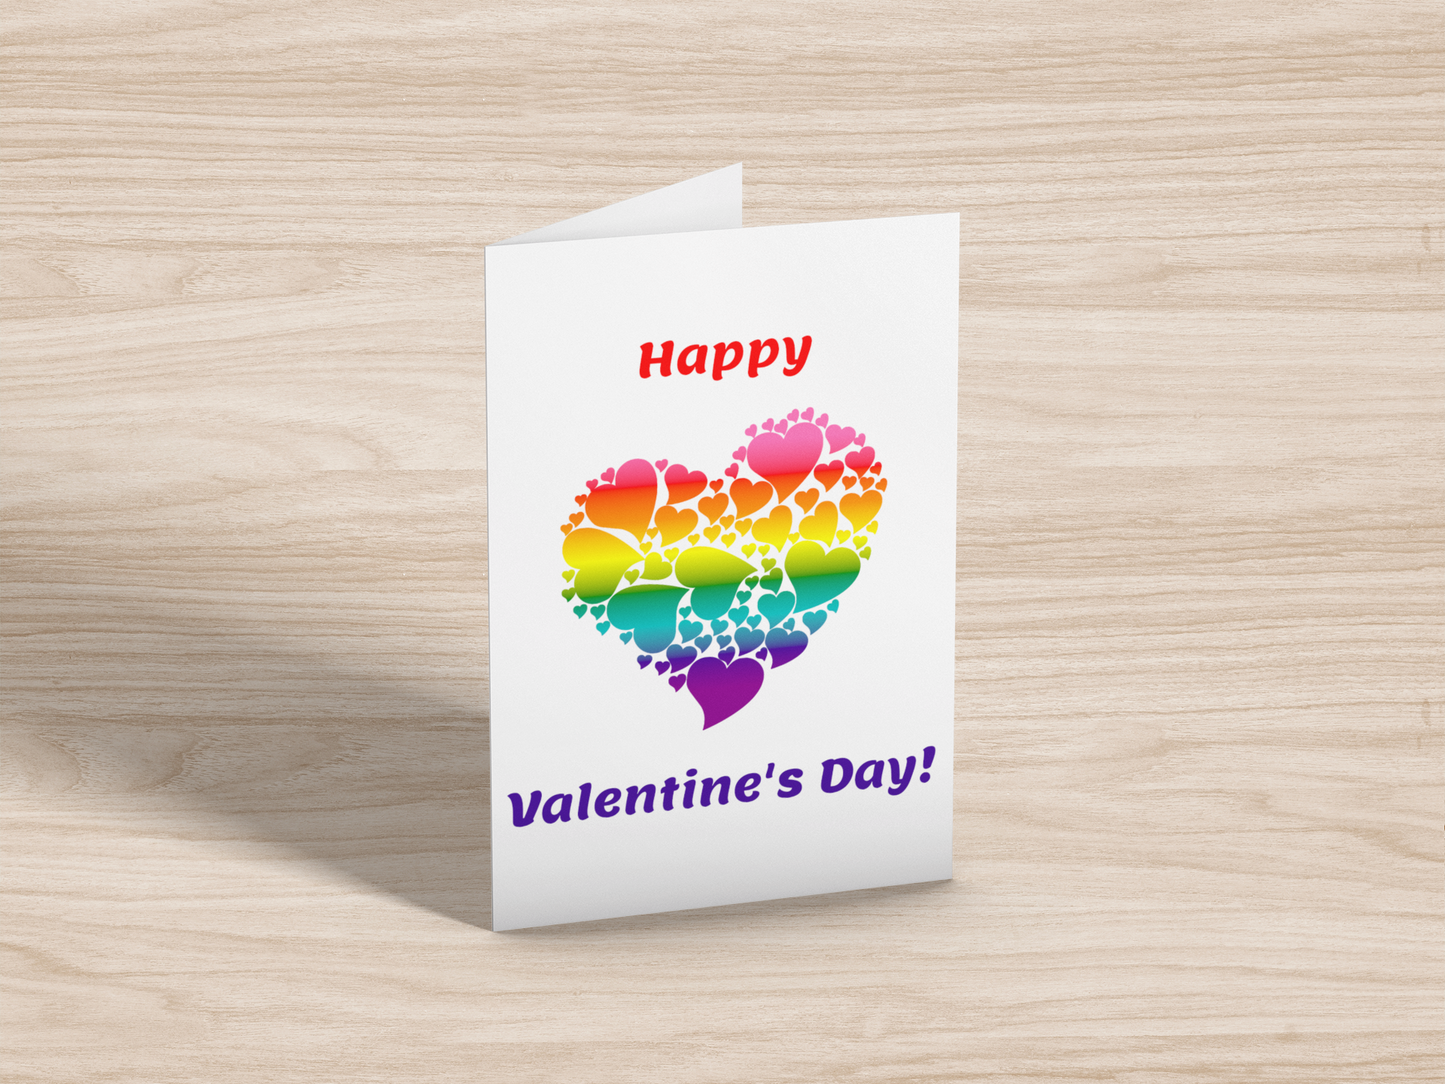 Mockup of a greeting card showing text: Happy Valentine's Day! and a heart made up of smaller hearts, coloured with a gradient of the original rainbow flag.